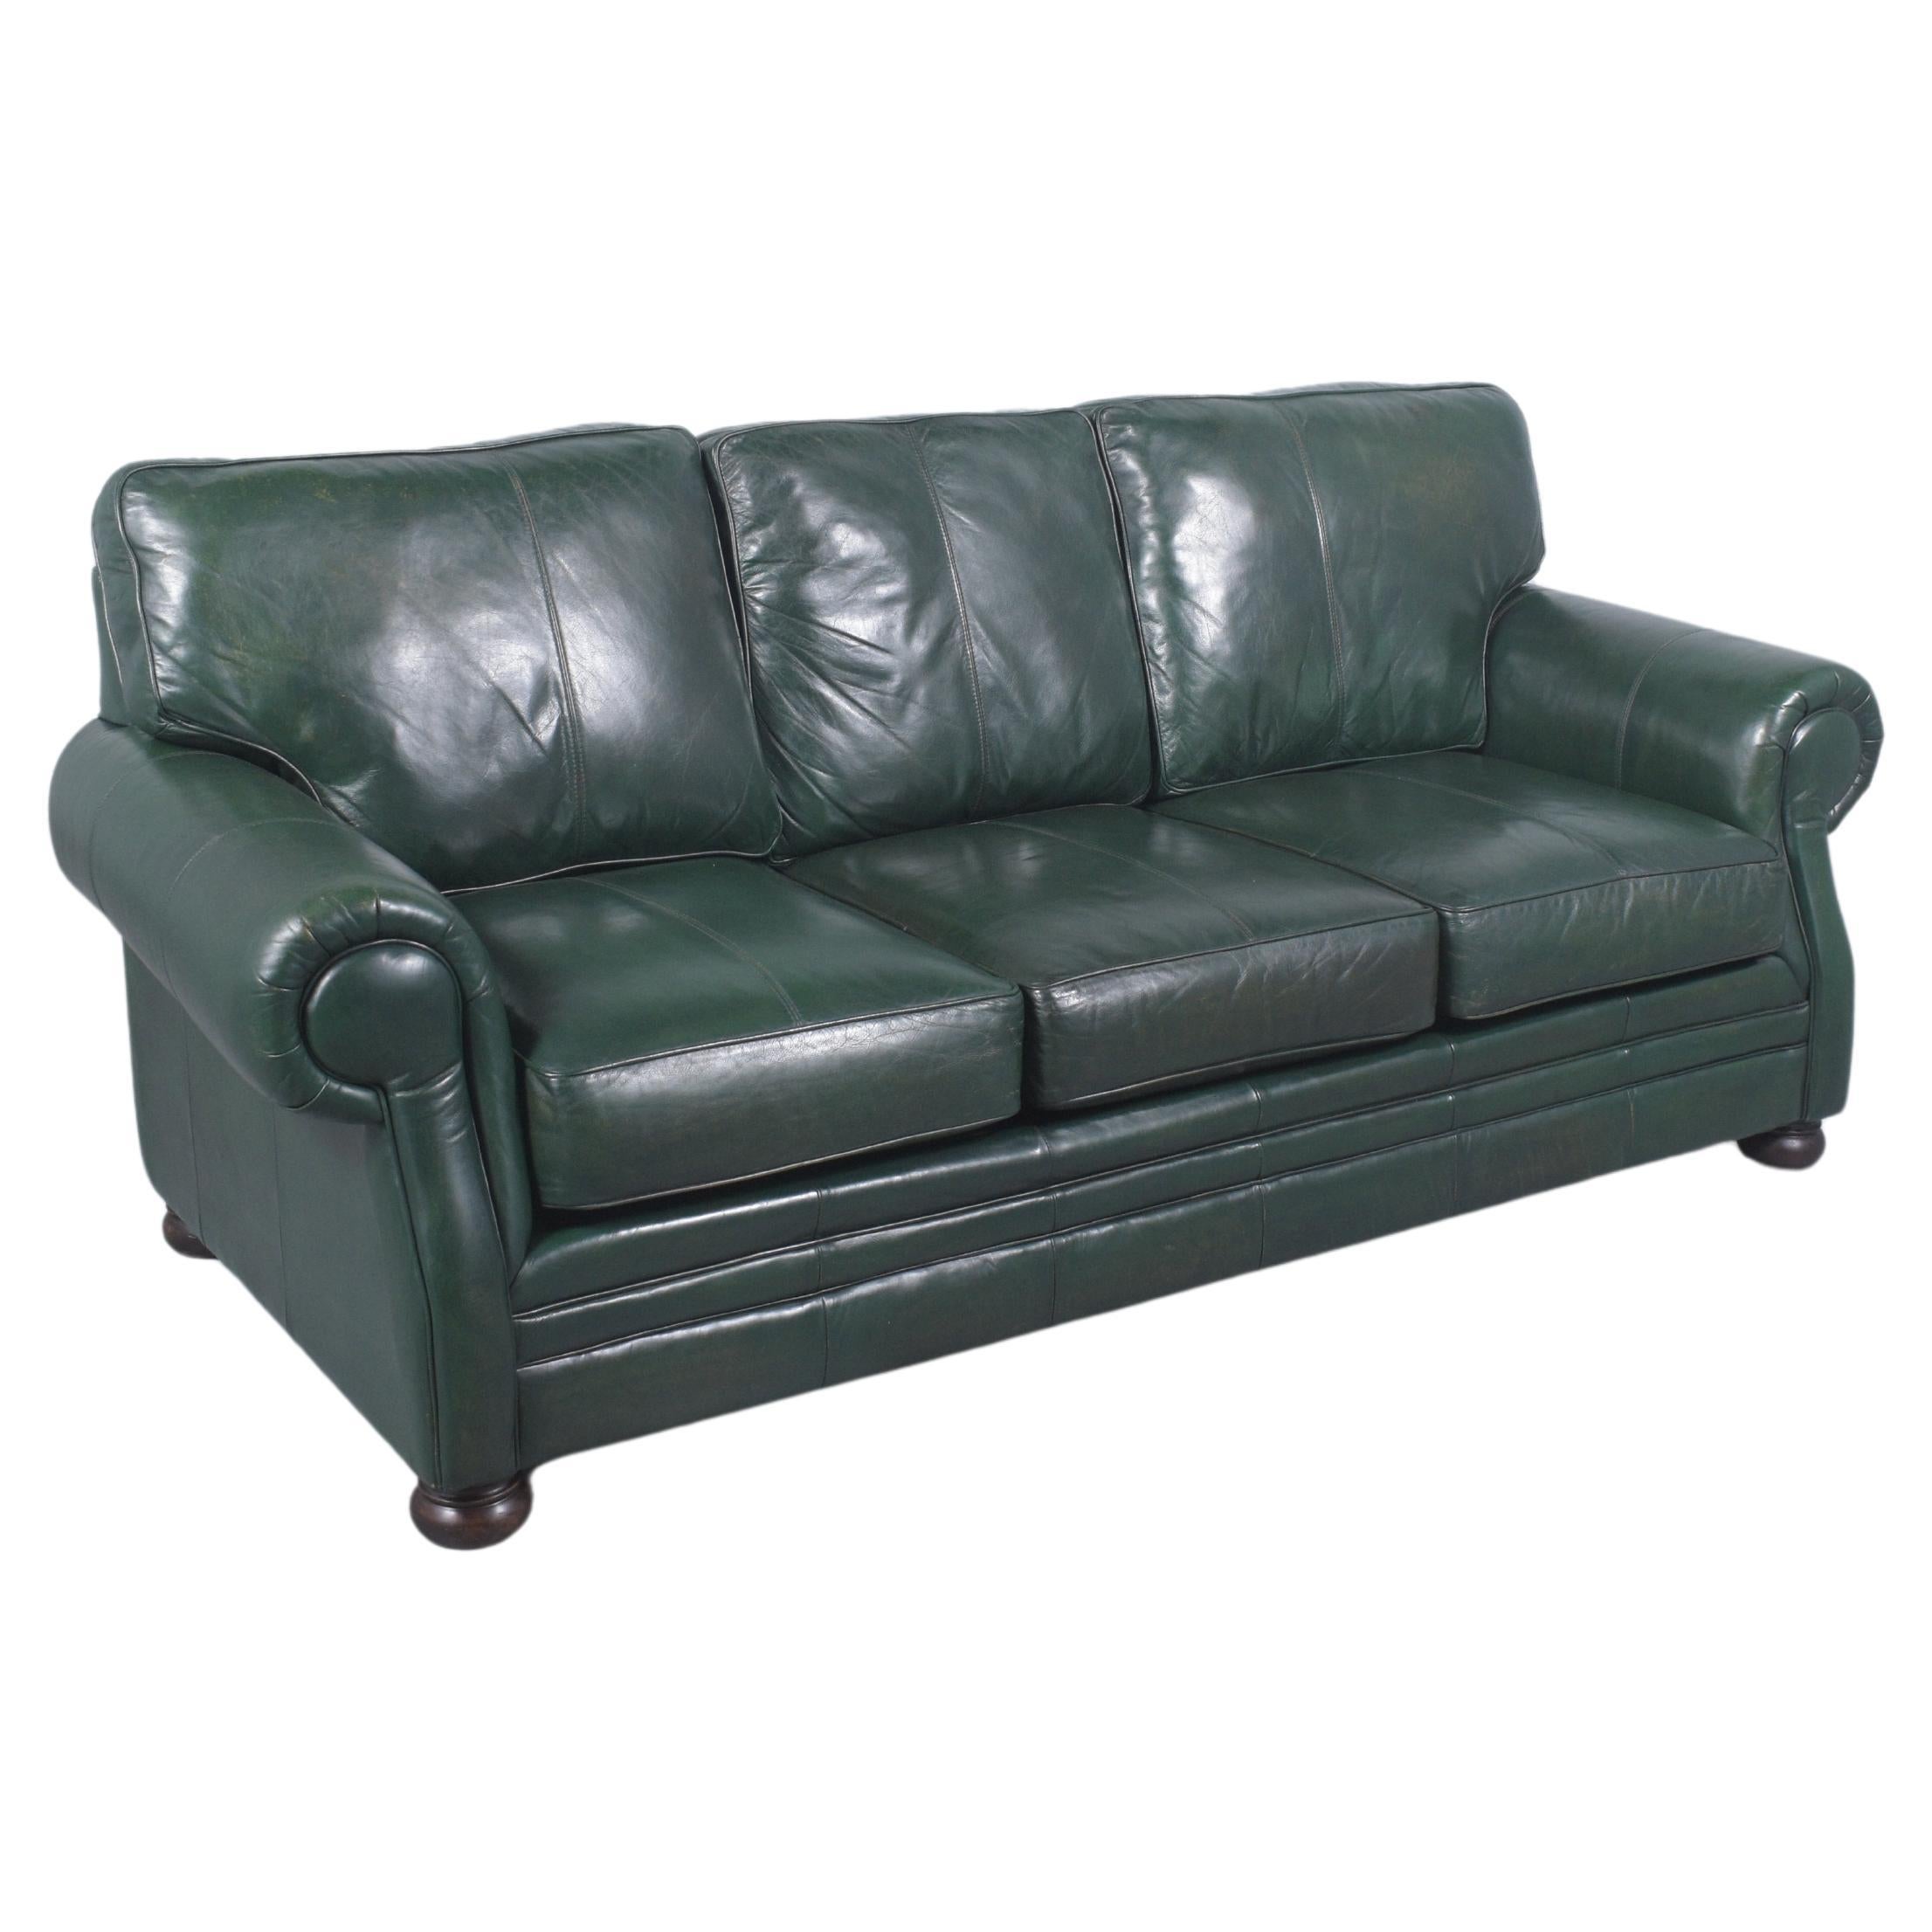 1980s Vintage Dark Green Leather Sofa with Carved Bun Legs